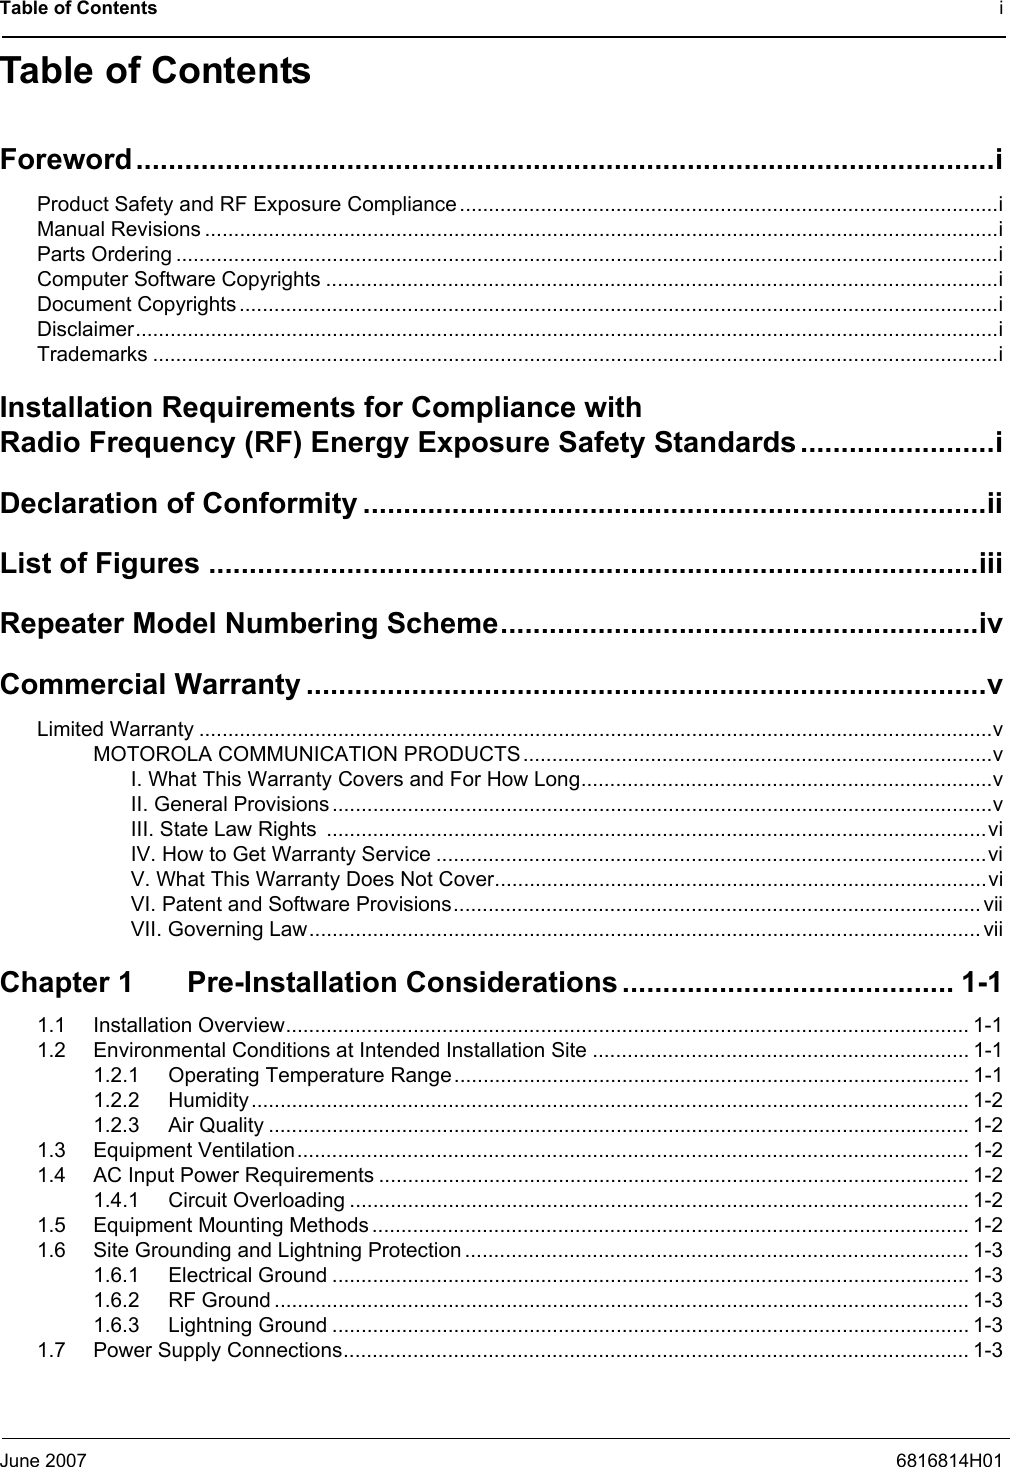 Table of Contents iJune 2007 6816814H01Table of ContentsForeword..........................................................................................................iProduct Safety and RF Exposure Compliance.............................................................................................iManual Revisions .........................................................................................................................................iParts Ordering ..............................................................................................................................................iComputer Software Copyrights ....................................................................................................................iDocument Copyrights...................................................................................................................................iDisclaimer.....................................................................................................................................................iTrademarks ..................................................................................................................................................iInstallation Requirements for Compliance with Radio Frequency (RF) Energy Exposure Safety Standards........................iDeclaration of Conformity .............................................................................iiList of Figures ...............................................................................................iiiRepeater Model Numbering Scheme...........................................................ivCommercial Warranty ....................................................................................vLimited Warranty .........................................................................................................................................vMOTOROLA COMMUNICATION PRODUCTS.................................................................................vI. What This Warranty Covers and For How Long.......................................................................vII. General Provisions ..................................................................................................................vIII. State Law Rights  ..................................................................................................................viIV. How to Get Warranty Service ...............................................................................................viV. What This Warranty Does Not Cover.....................................................................................viVI. Patent and Software Provisions........................................................................................... viiVII. Governing Law.................................................................................................................... viiChapter 1 Pre-Installation Considerations......................................... 1-11.1 Installation Overview...................................................................................................................... 1-11.2 Environmental Conditions at Intended Installation Site ................................................................. 1-11.2.1 Operating Temperature Range......................................................................................... 1-11.2.2 Humidity............................................................................................................................ 1-21.2.3 Air Quality ......................................................................................................................... 1-21.3 Equipment Ventilation.................................................................................................................... 1-21.4 AC Input Power Requirements ...................................................................................................... 1-21.4.1 Circuit Overloading ........................................................................................................... 1-21.5 Equipment Mounting Methods ....................................................................................................... 1-21.6 Site Grounding and Lightning Protection ....................................................................................... 1-31.6.1 Electrical Ground .............................................................................................................. 1-31.6.2 RF Ground ........................................................................................................................ 1-31.6.3 Lightning Ground .............................................................................................................. 1-31.7 Power Supply Connections............................................................................................................ 1-3